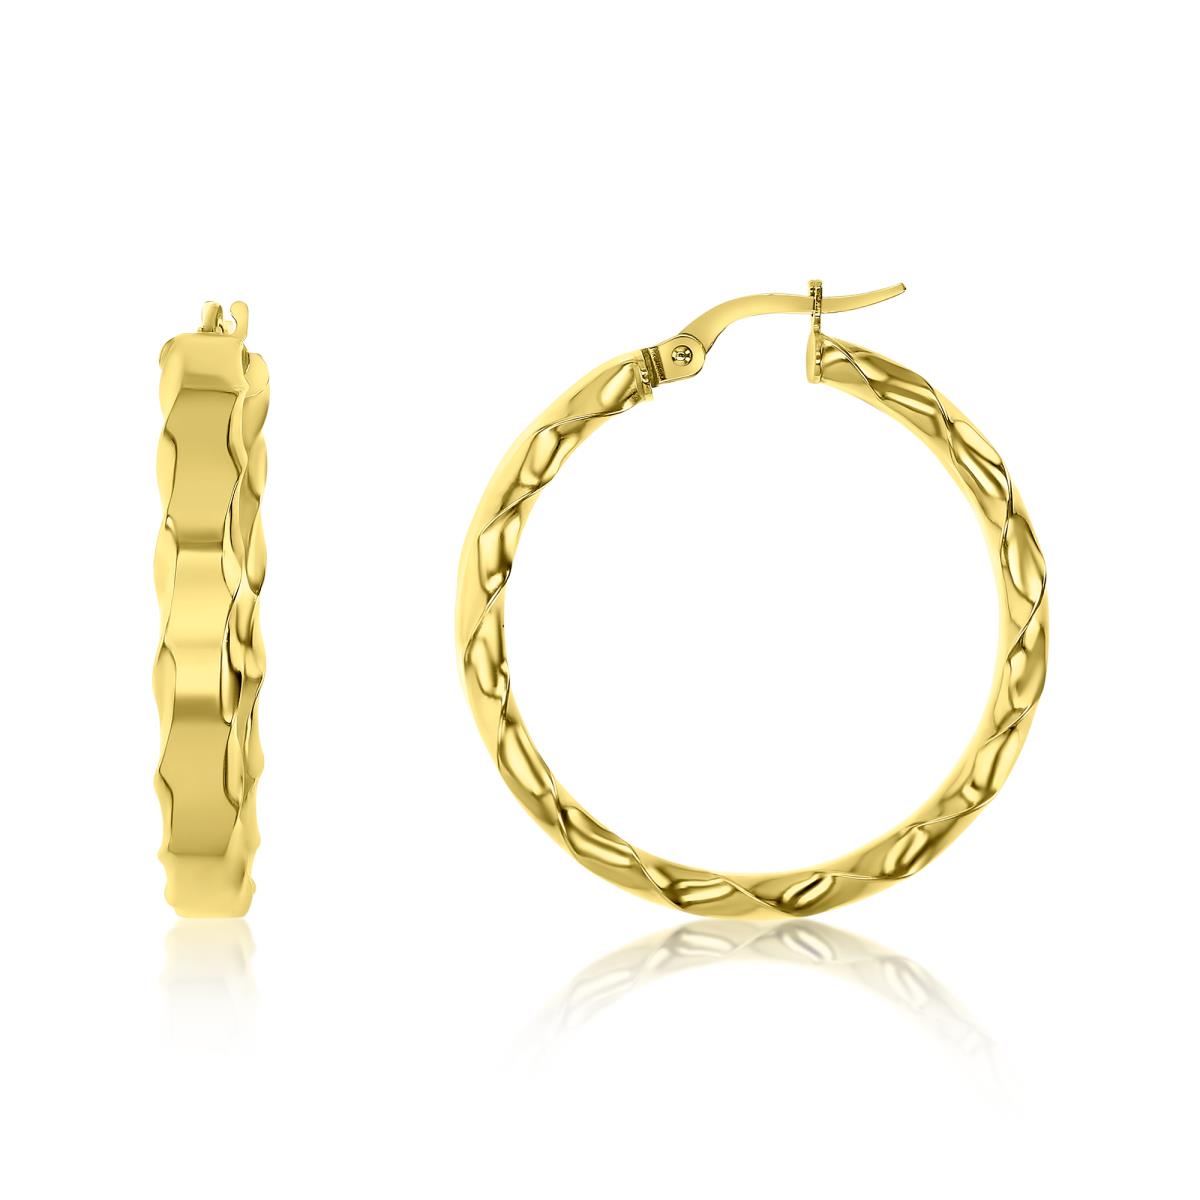 14K Gold Yellow Satin & Polished Twisted Hoop Earring